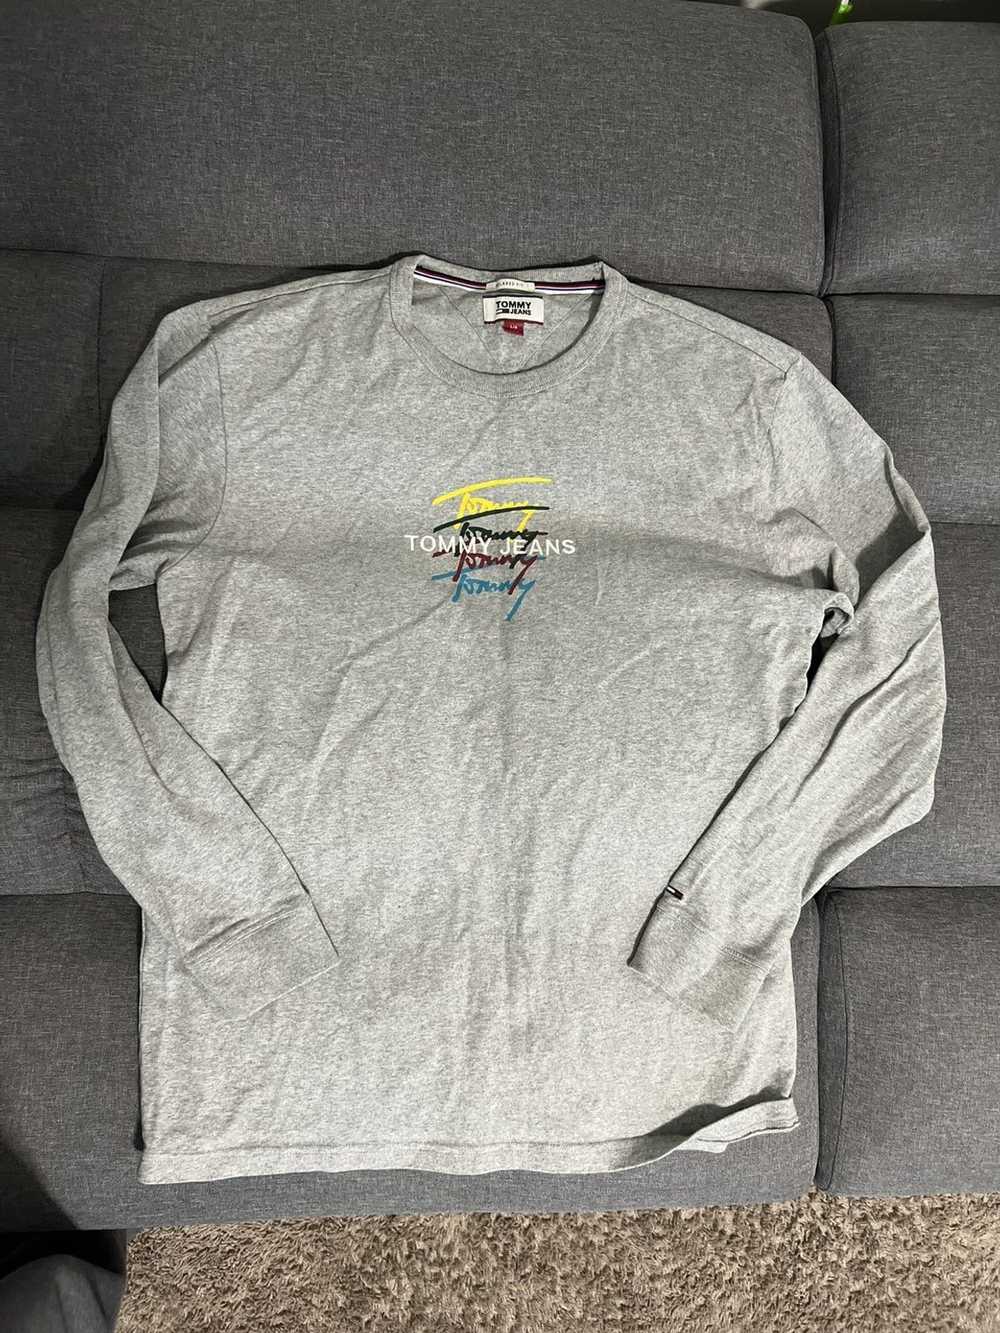 Tommy Jeans Long Sleeve Tommy Jeans Shirt - image 2